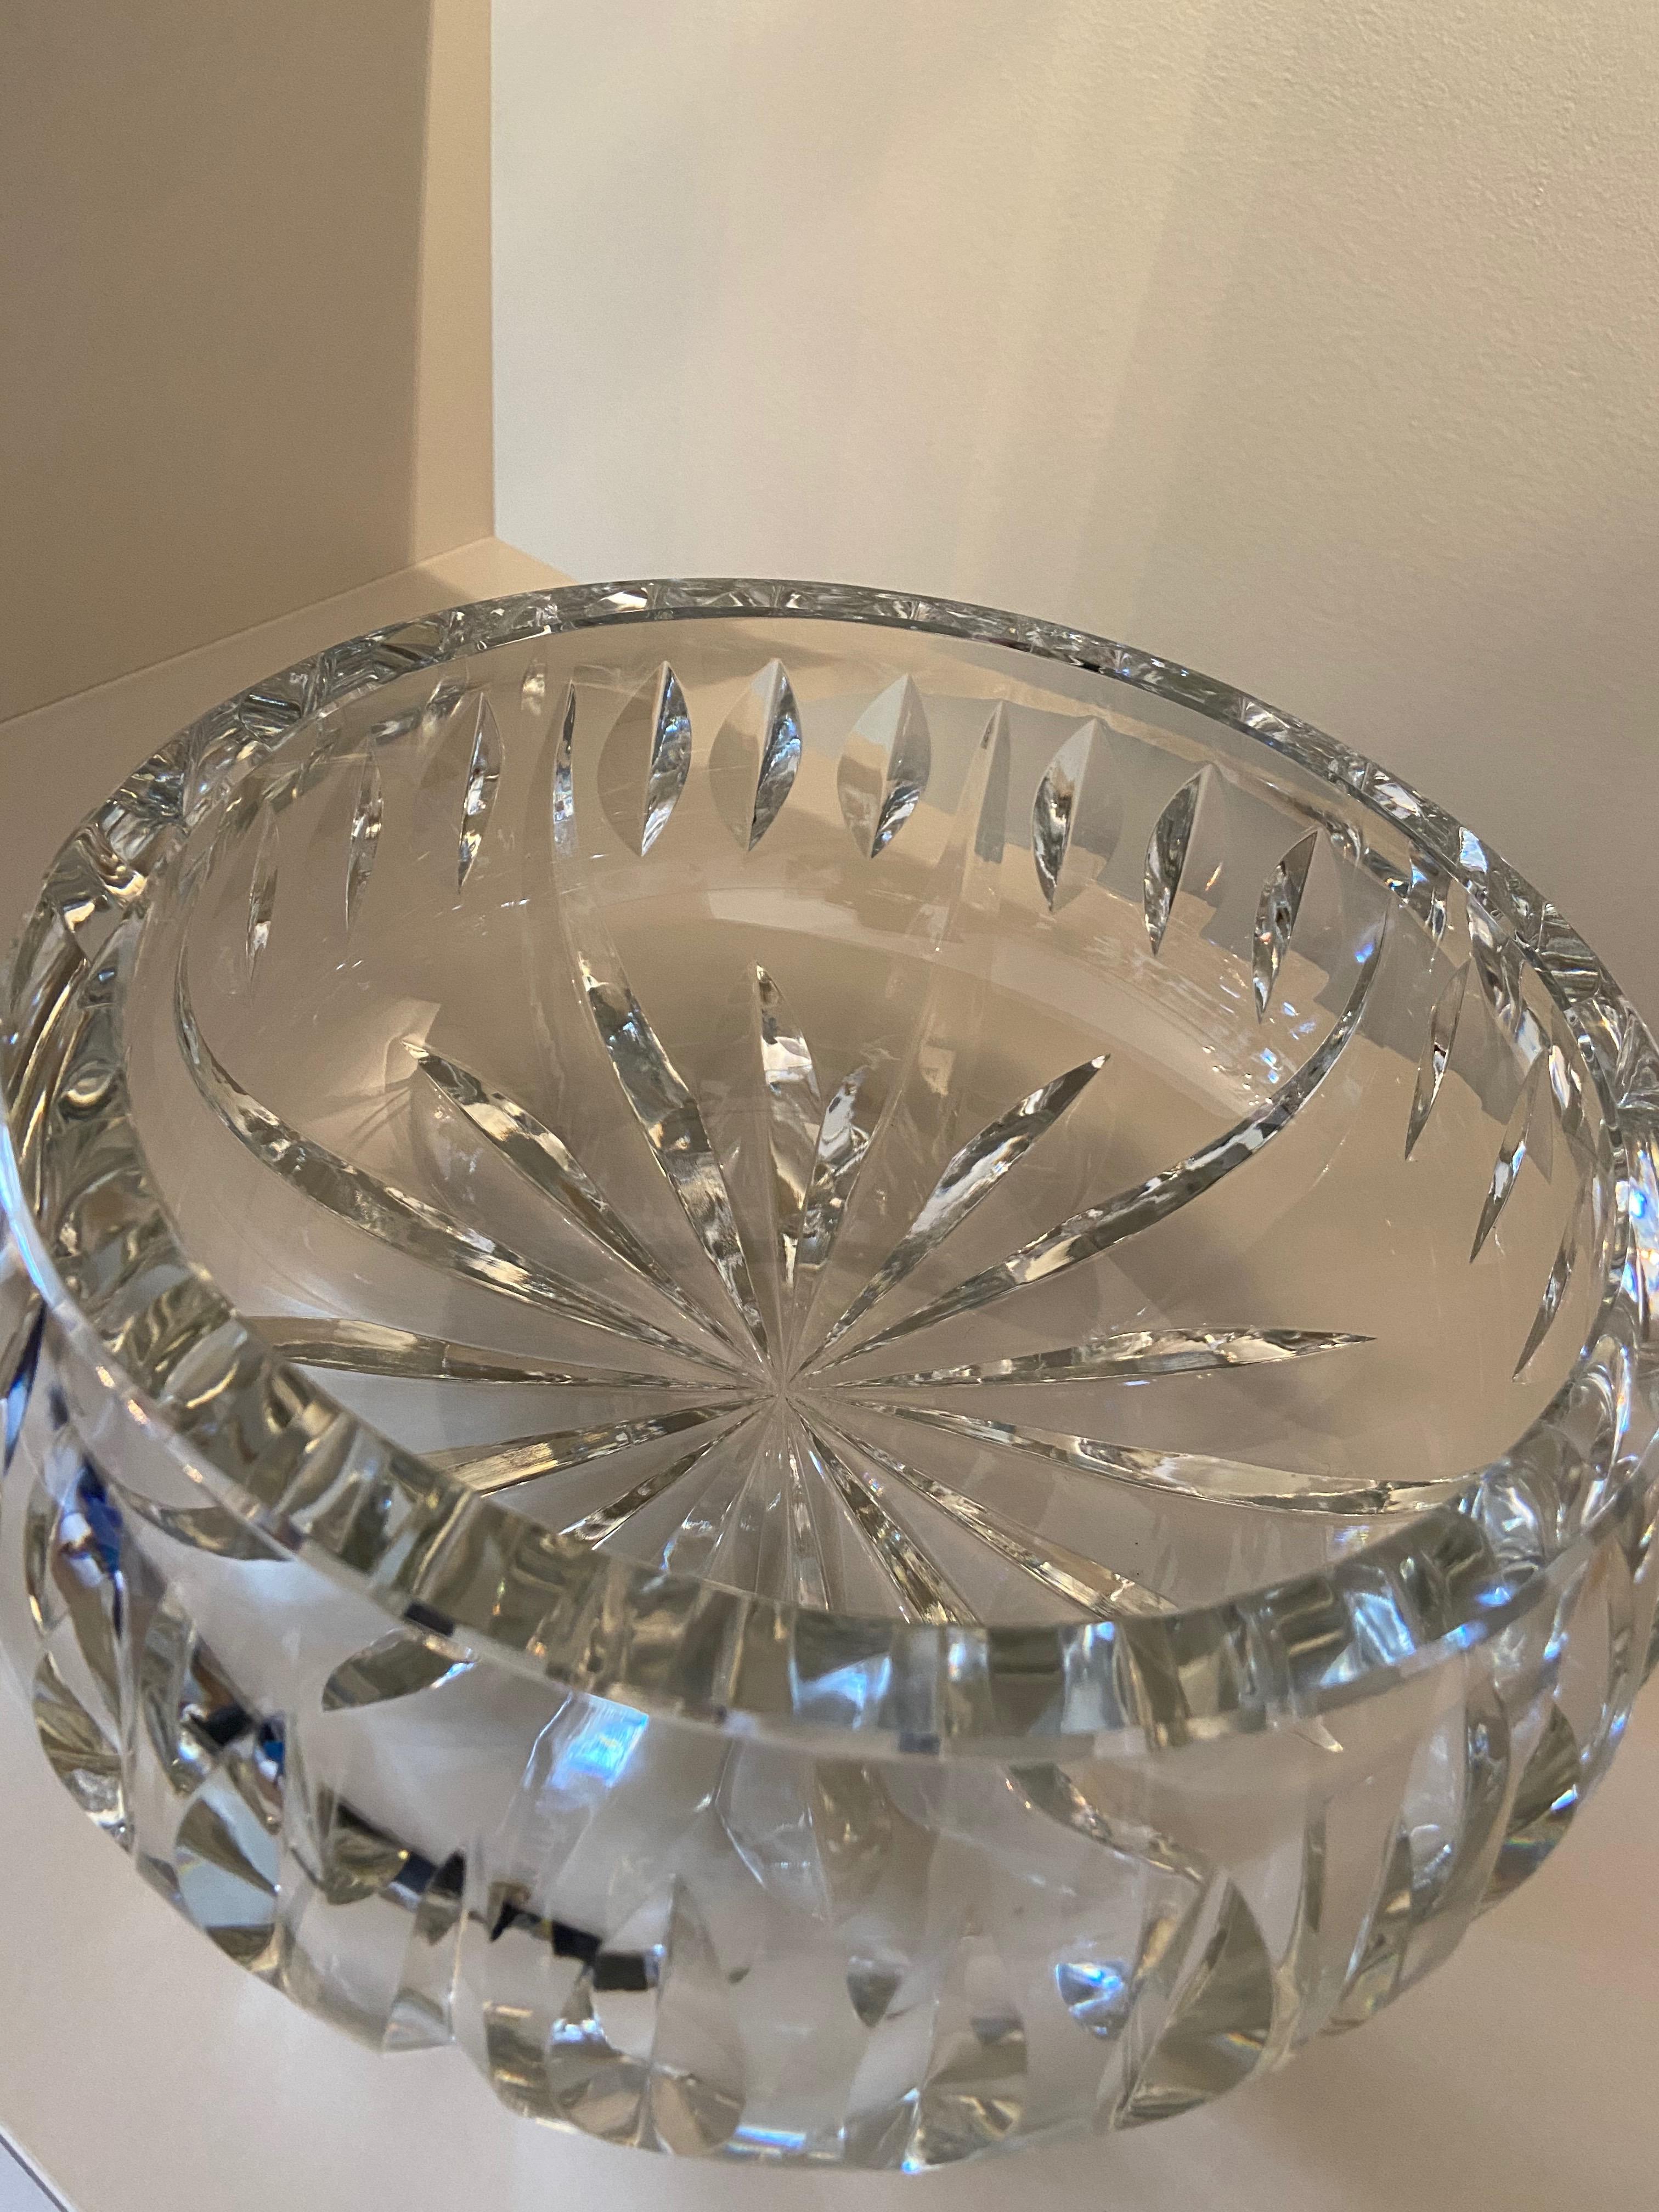 Crystal fruit bowl from Saint Louis manufacture, in its original box. Beautifully carved crystal.